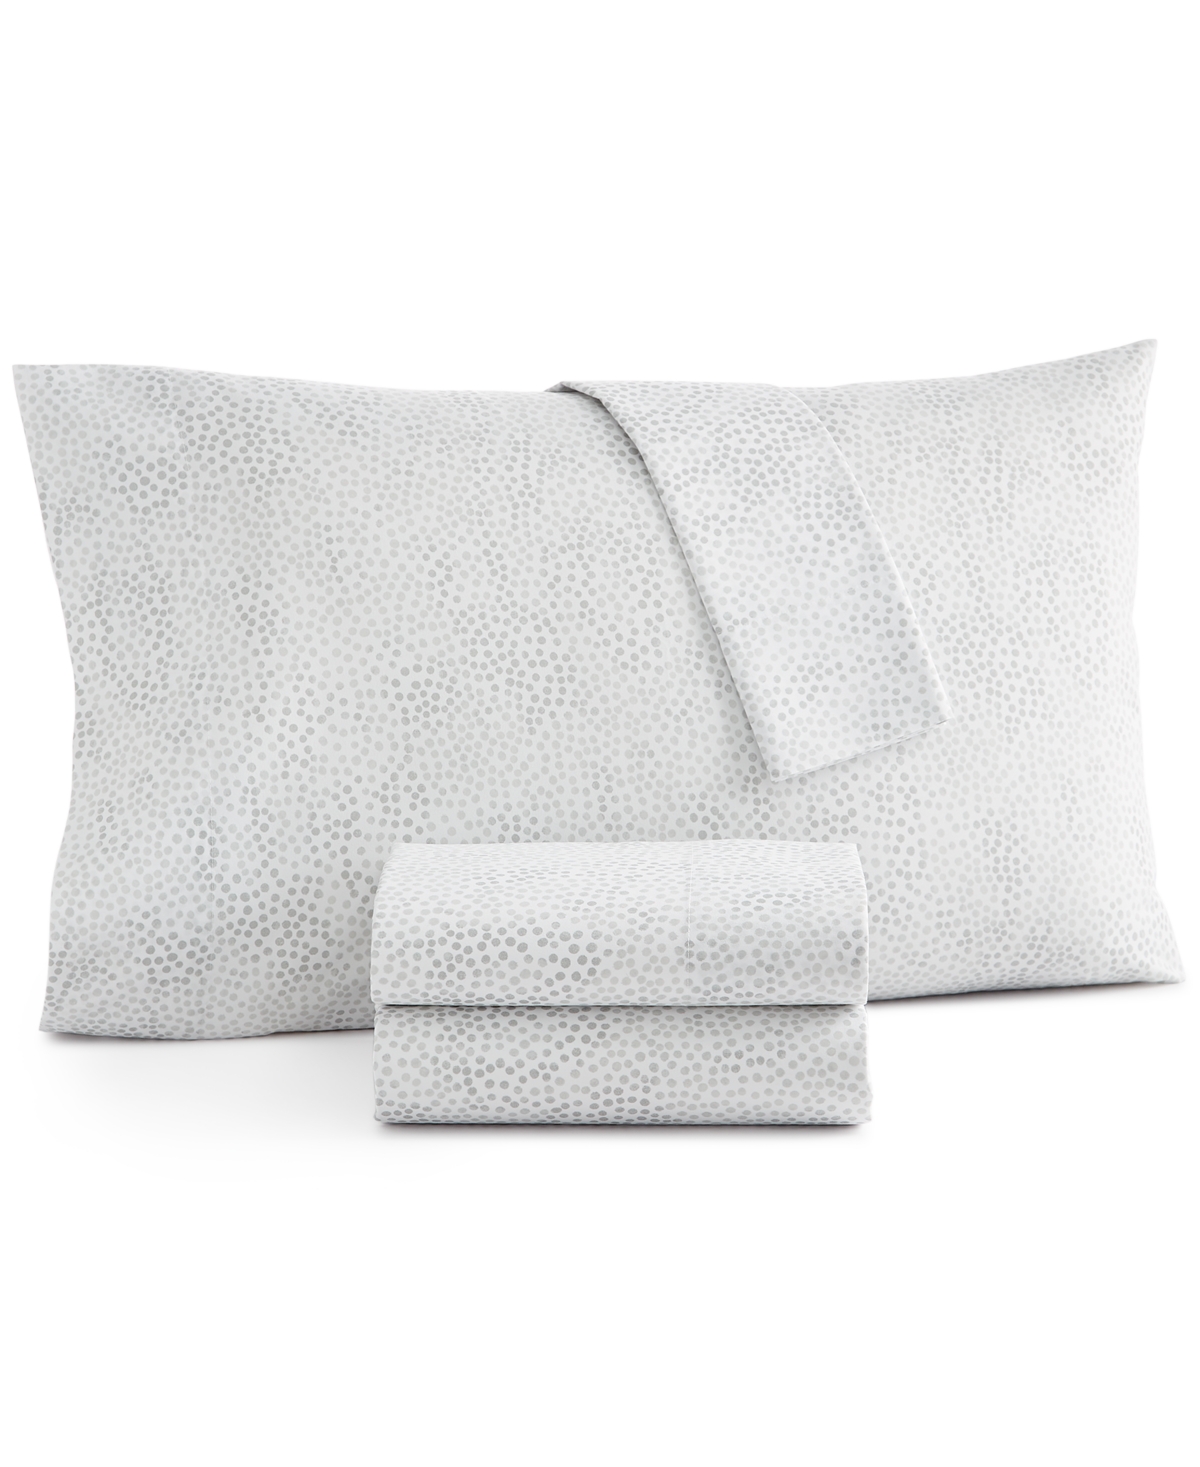 Home Design Easy Care Printed Microfiber 4-pc. Sheet Set, Full, Created For Macy's In Grey Dots